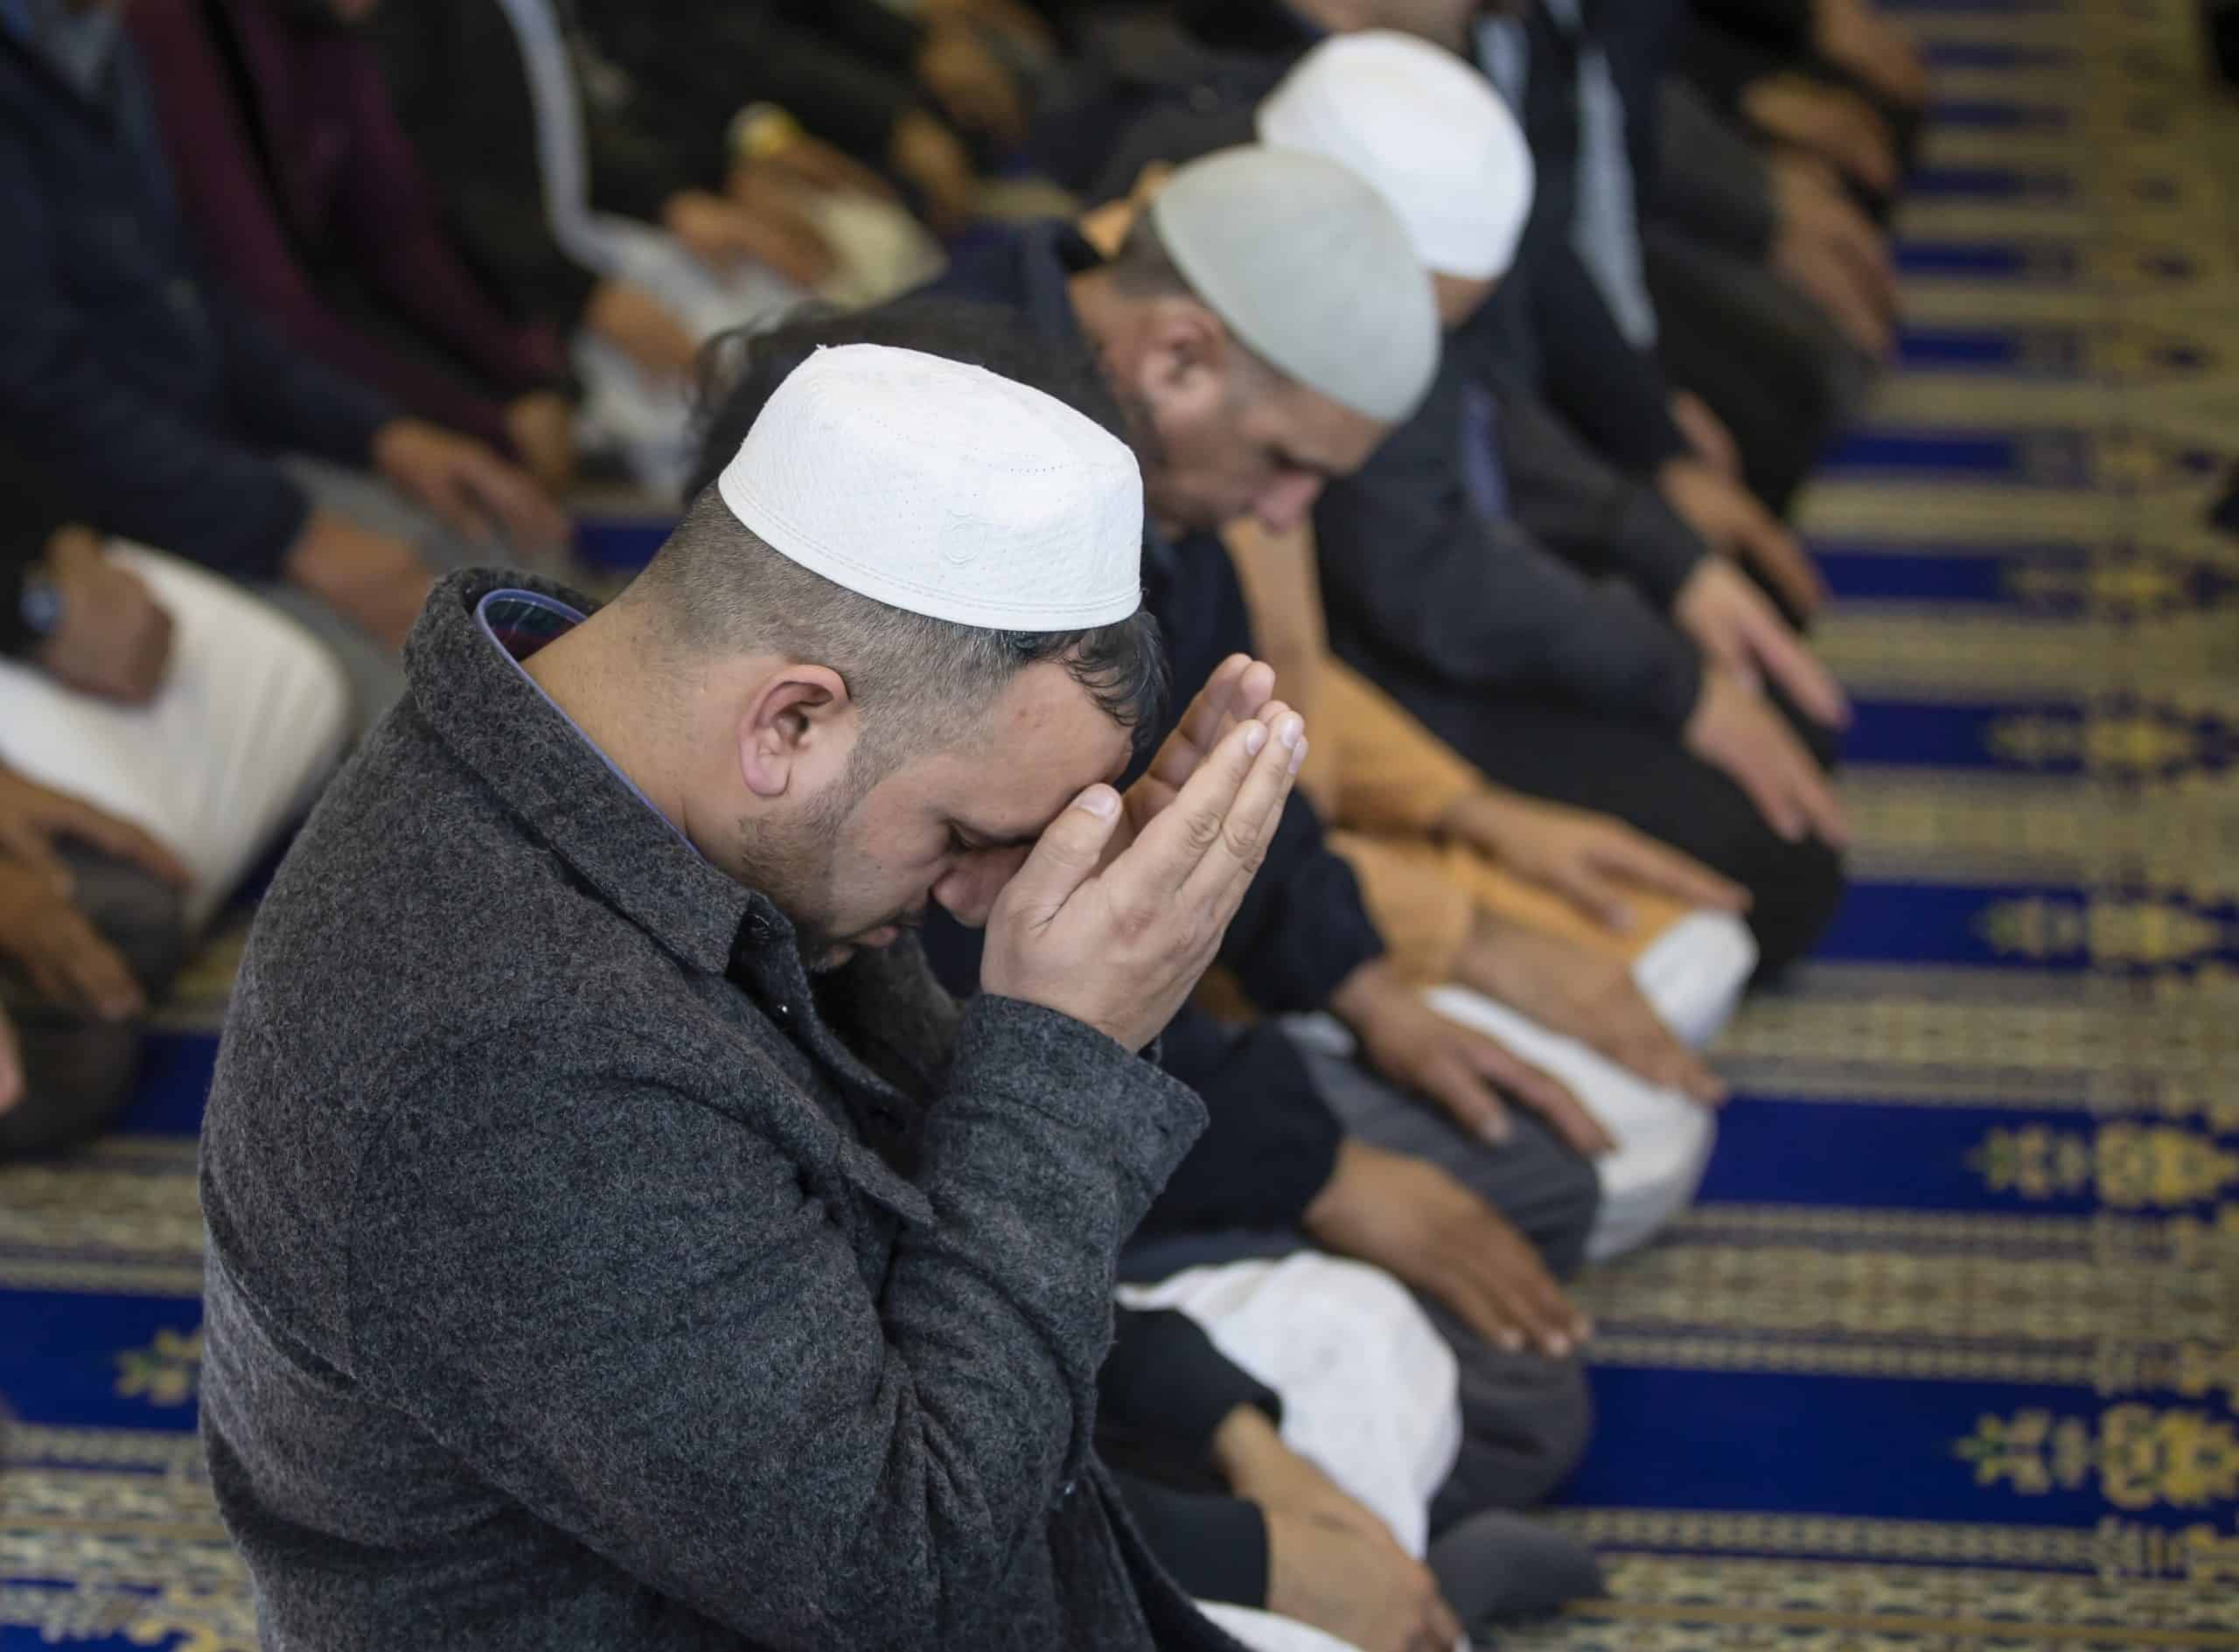 Muslim leaders fear Christchurch-style attack could happen in UK